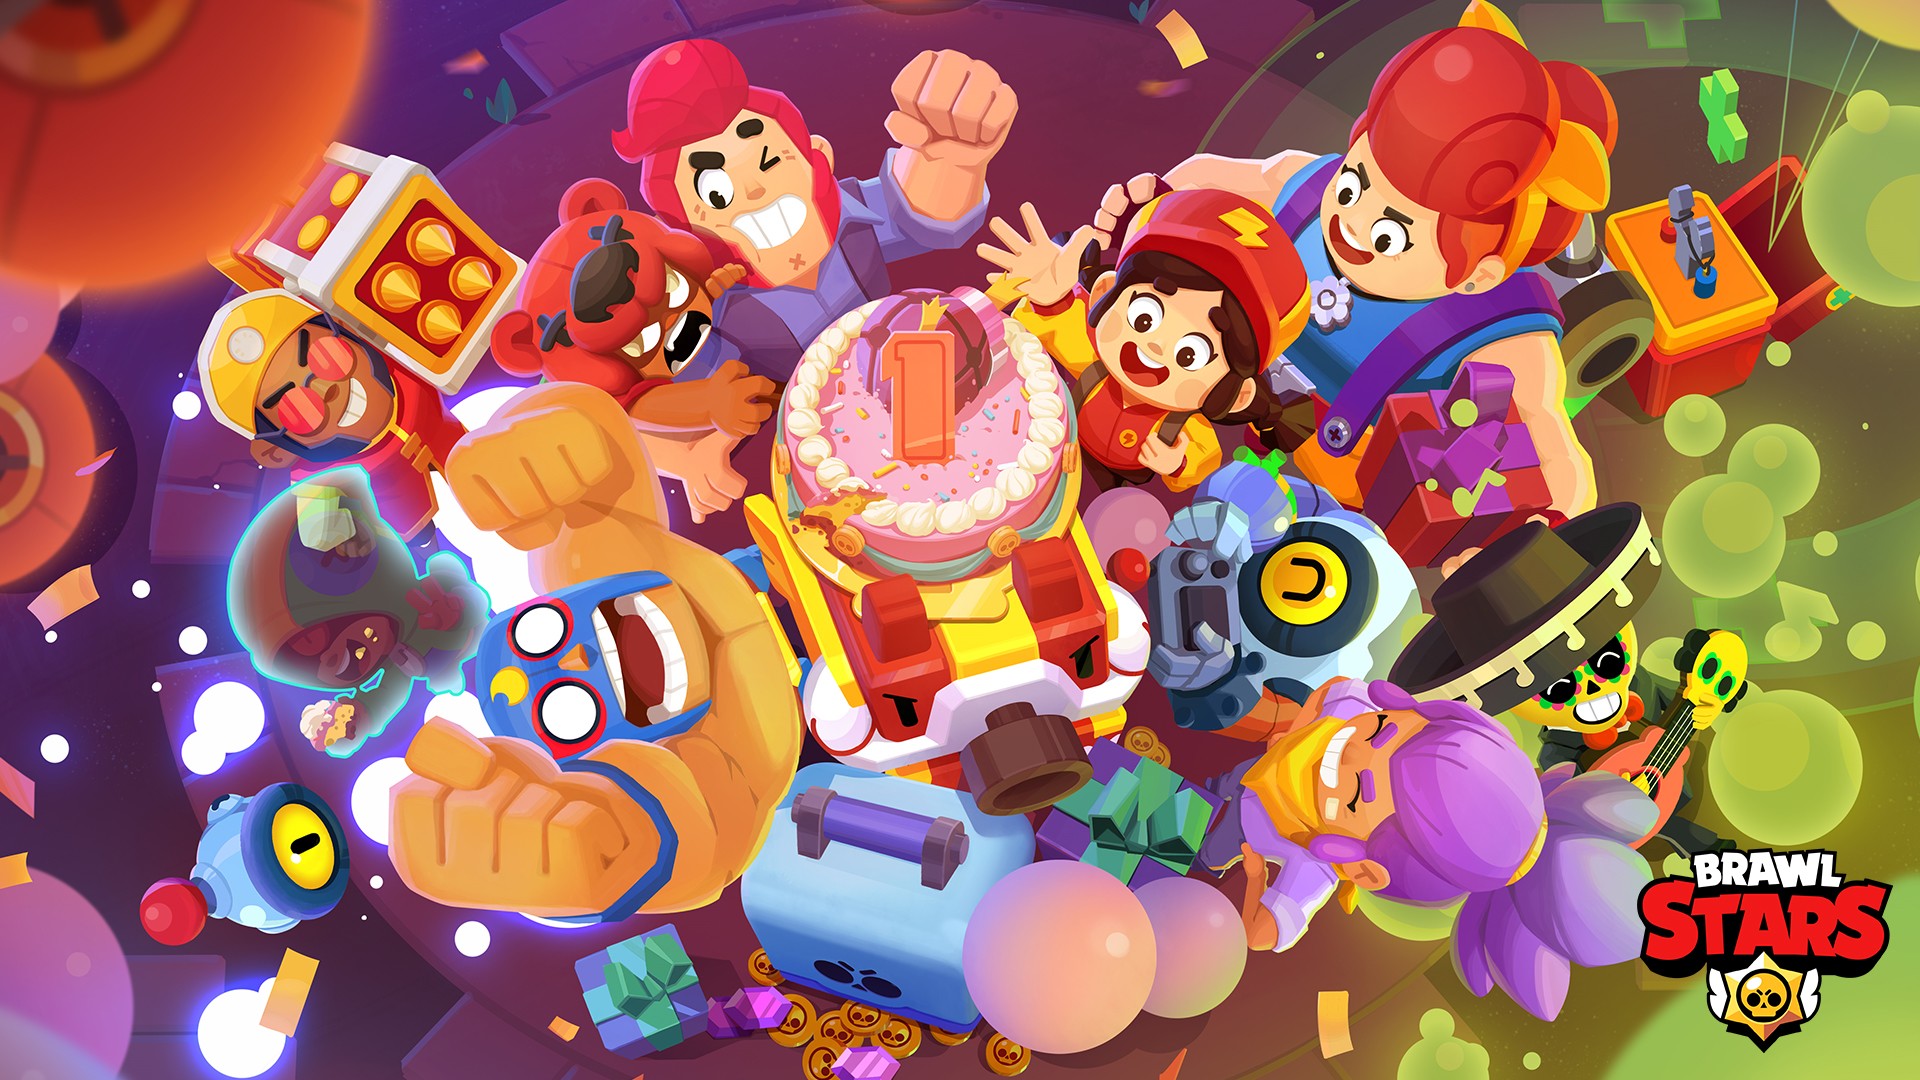 Free Boxes And Skins Up For Grabs In Brawl Stars To Celebrate One Year Anniversary Of China Release Dot Esports - brawl star is 10x elixir legendary